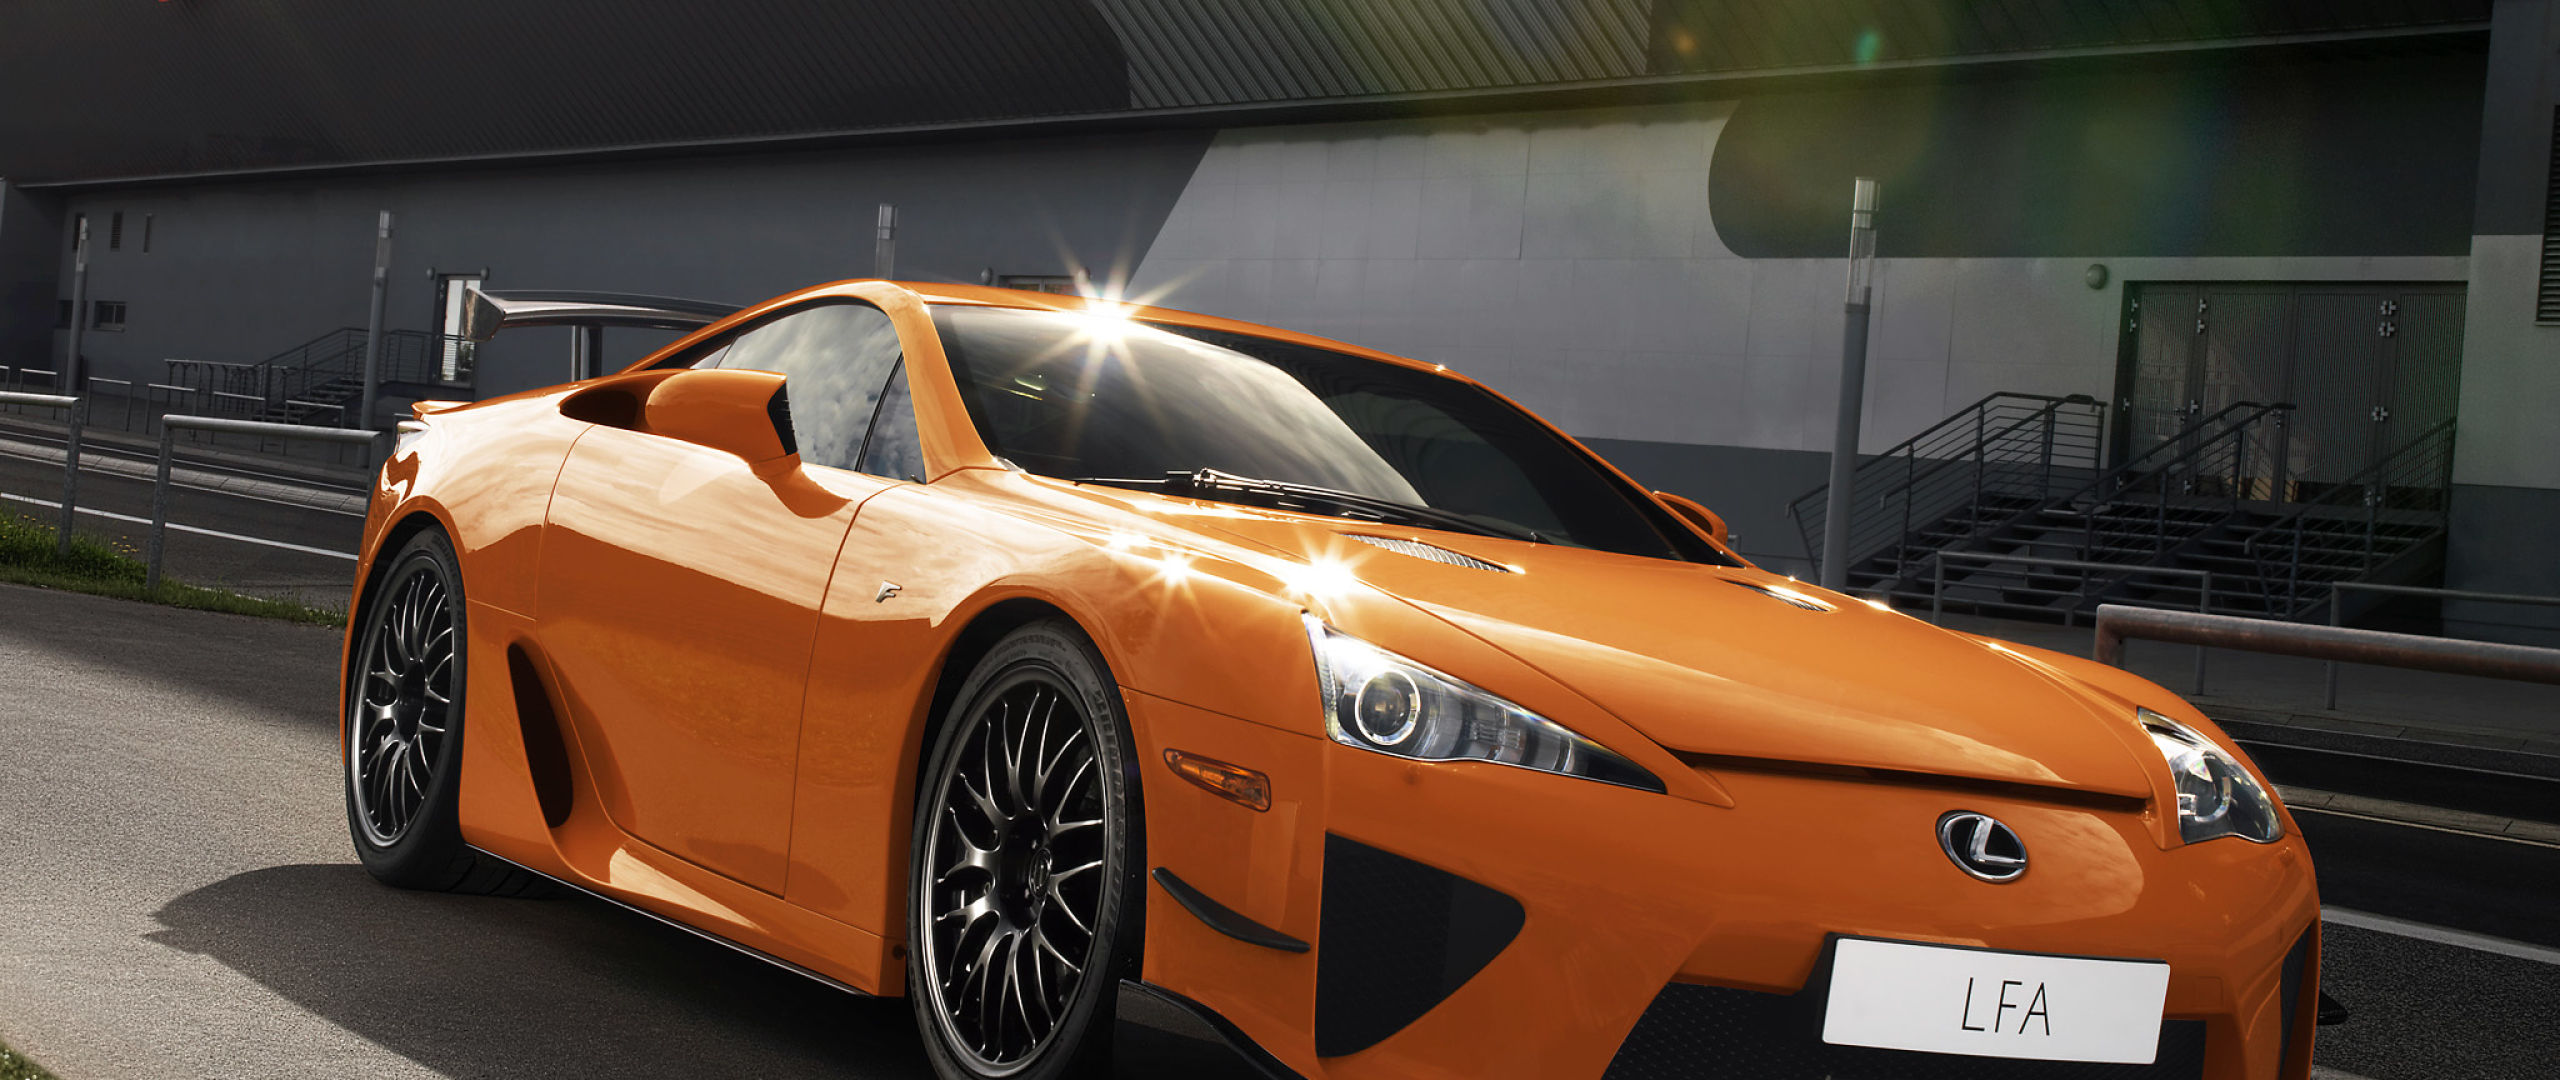 2560x1080 Lexus Lfa Orange 2560x1080 Resolution Wallpaper Hd Cars 4k Wallpapers Images Photos And Background Wallpapers Den